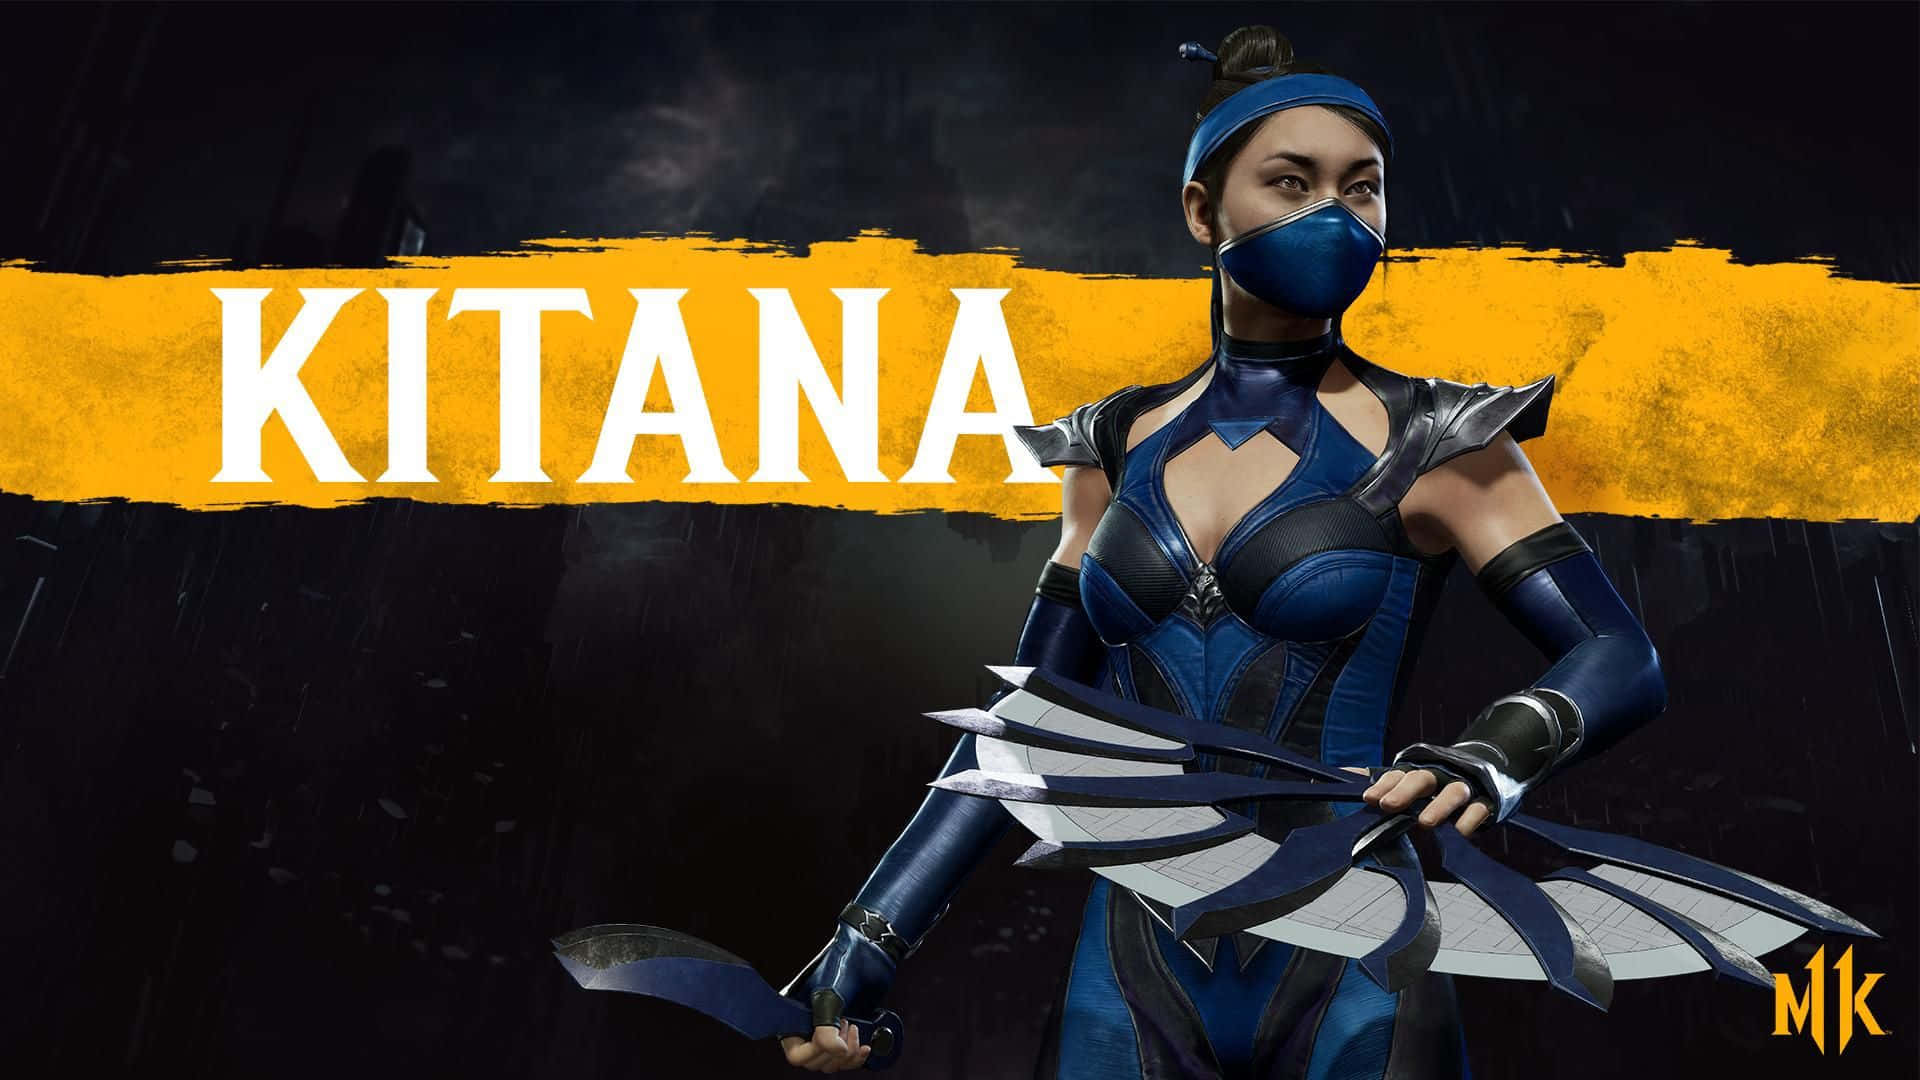 Kitana, the fierce and beautiful warrior from Mortal Kombat, in action. Wallpaper